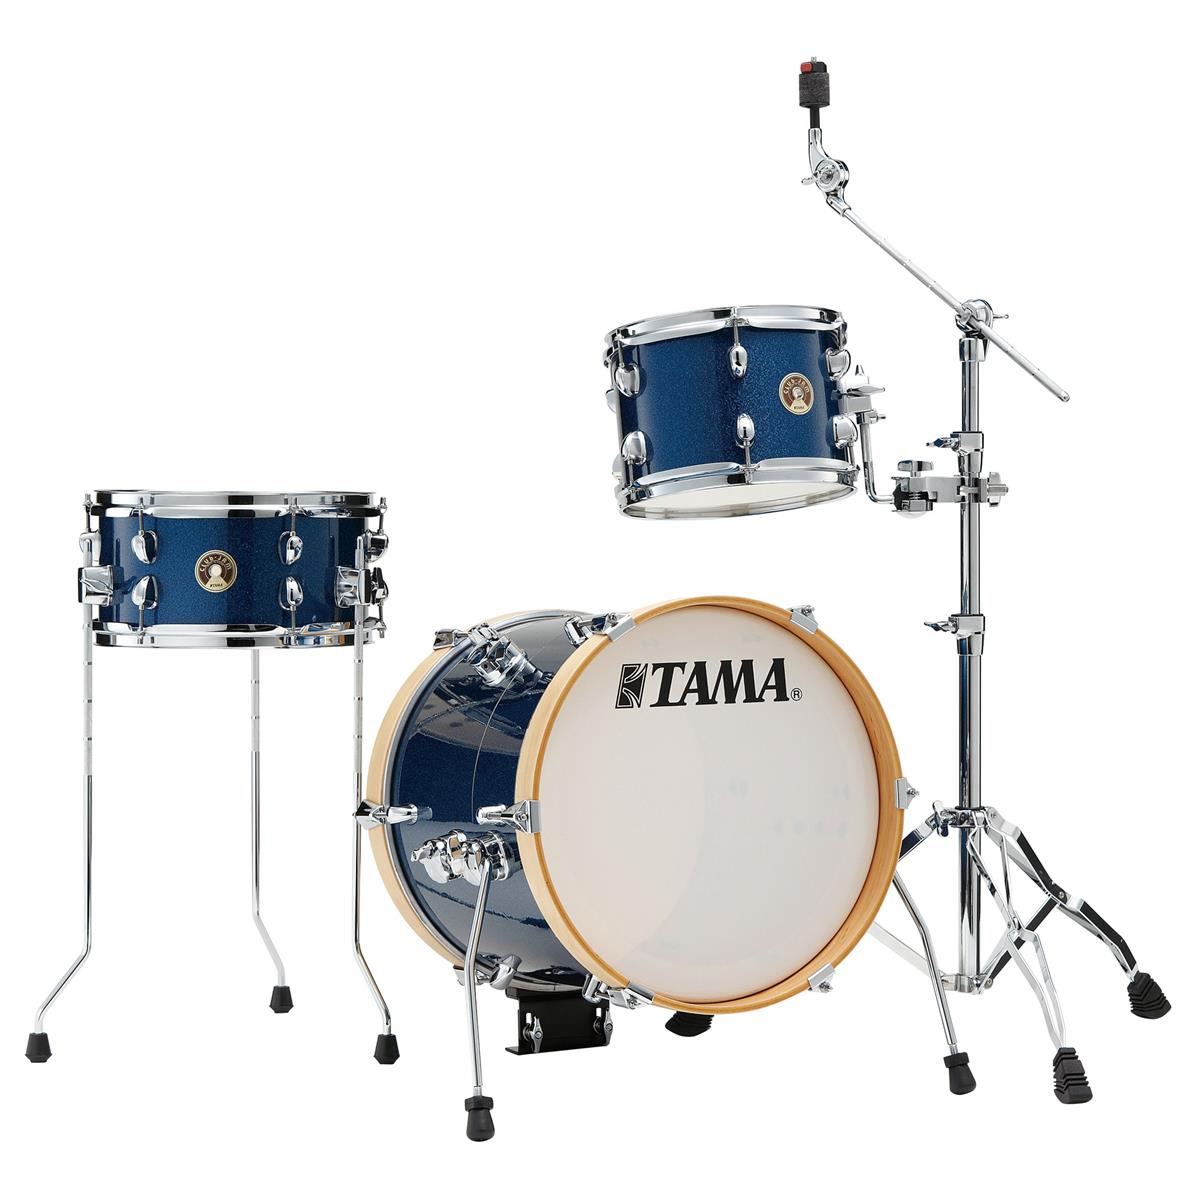 TAMA Club-JAM Suitcase 3-piece shell pack with 16 inch bass drum in Indigo Sparkle